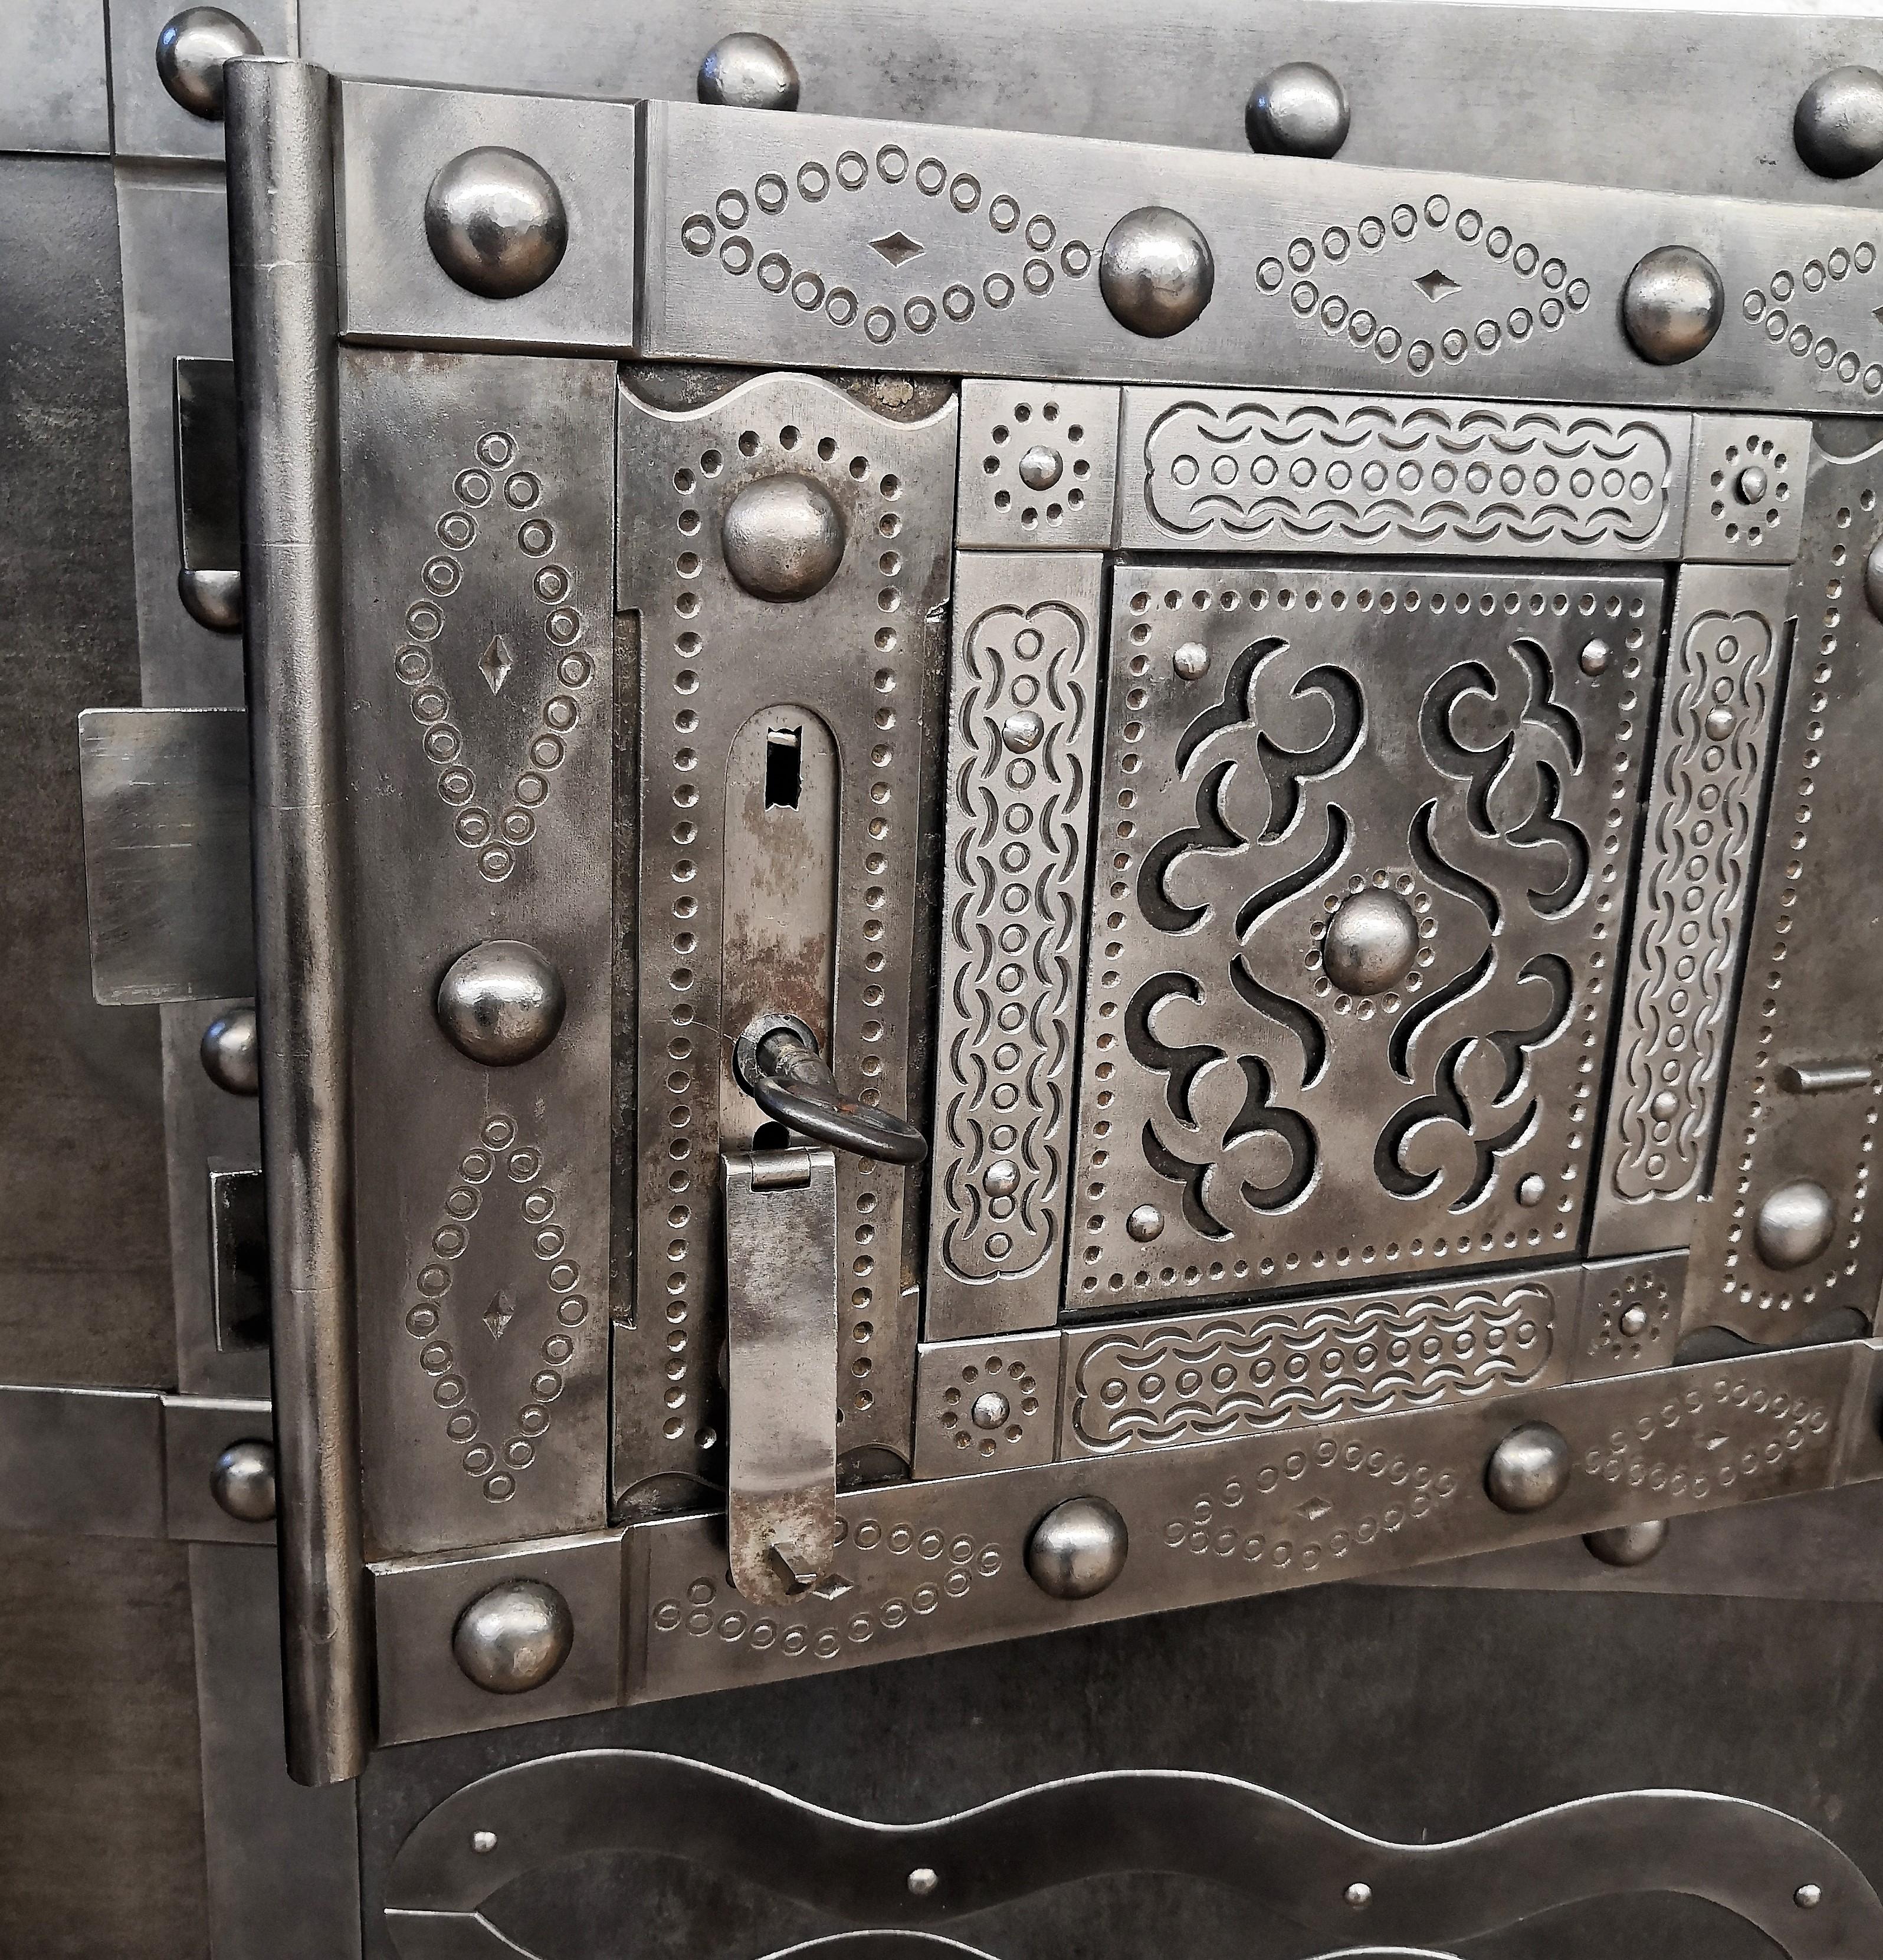 Northern Italian safe with all-around hobnails, dated circa 1790-1840, probably from the Piedmont region that features great decorations with burin incisions, a typical handmade technique of 'dots' engraving process typical from the period. The safe